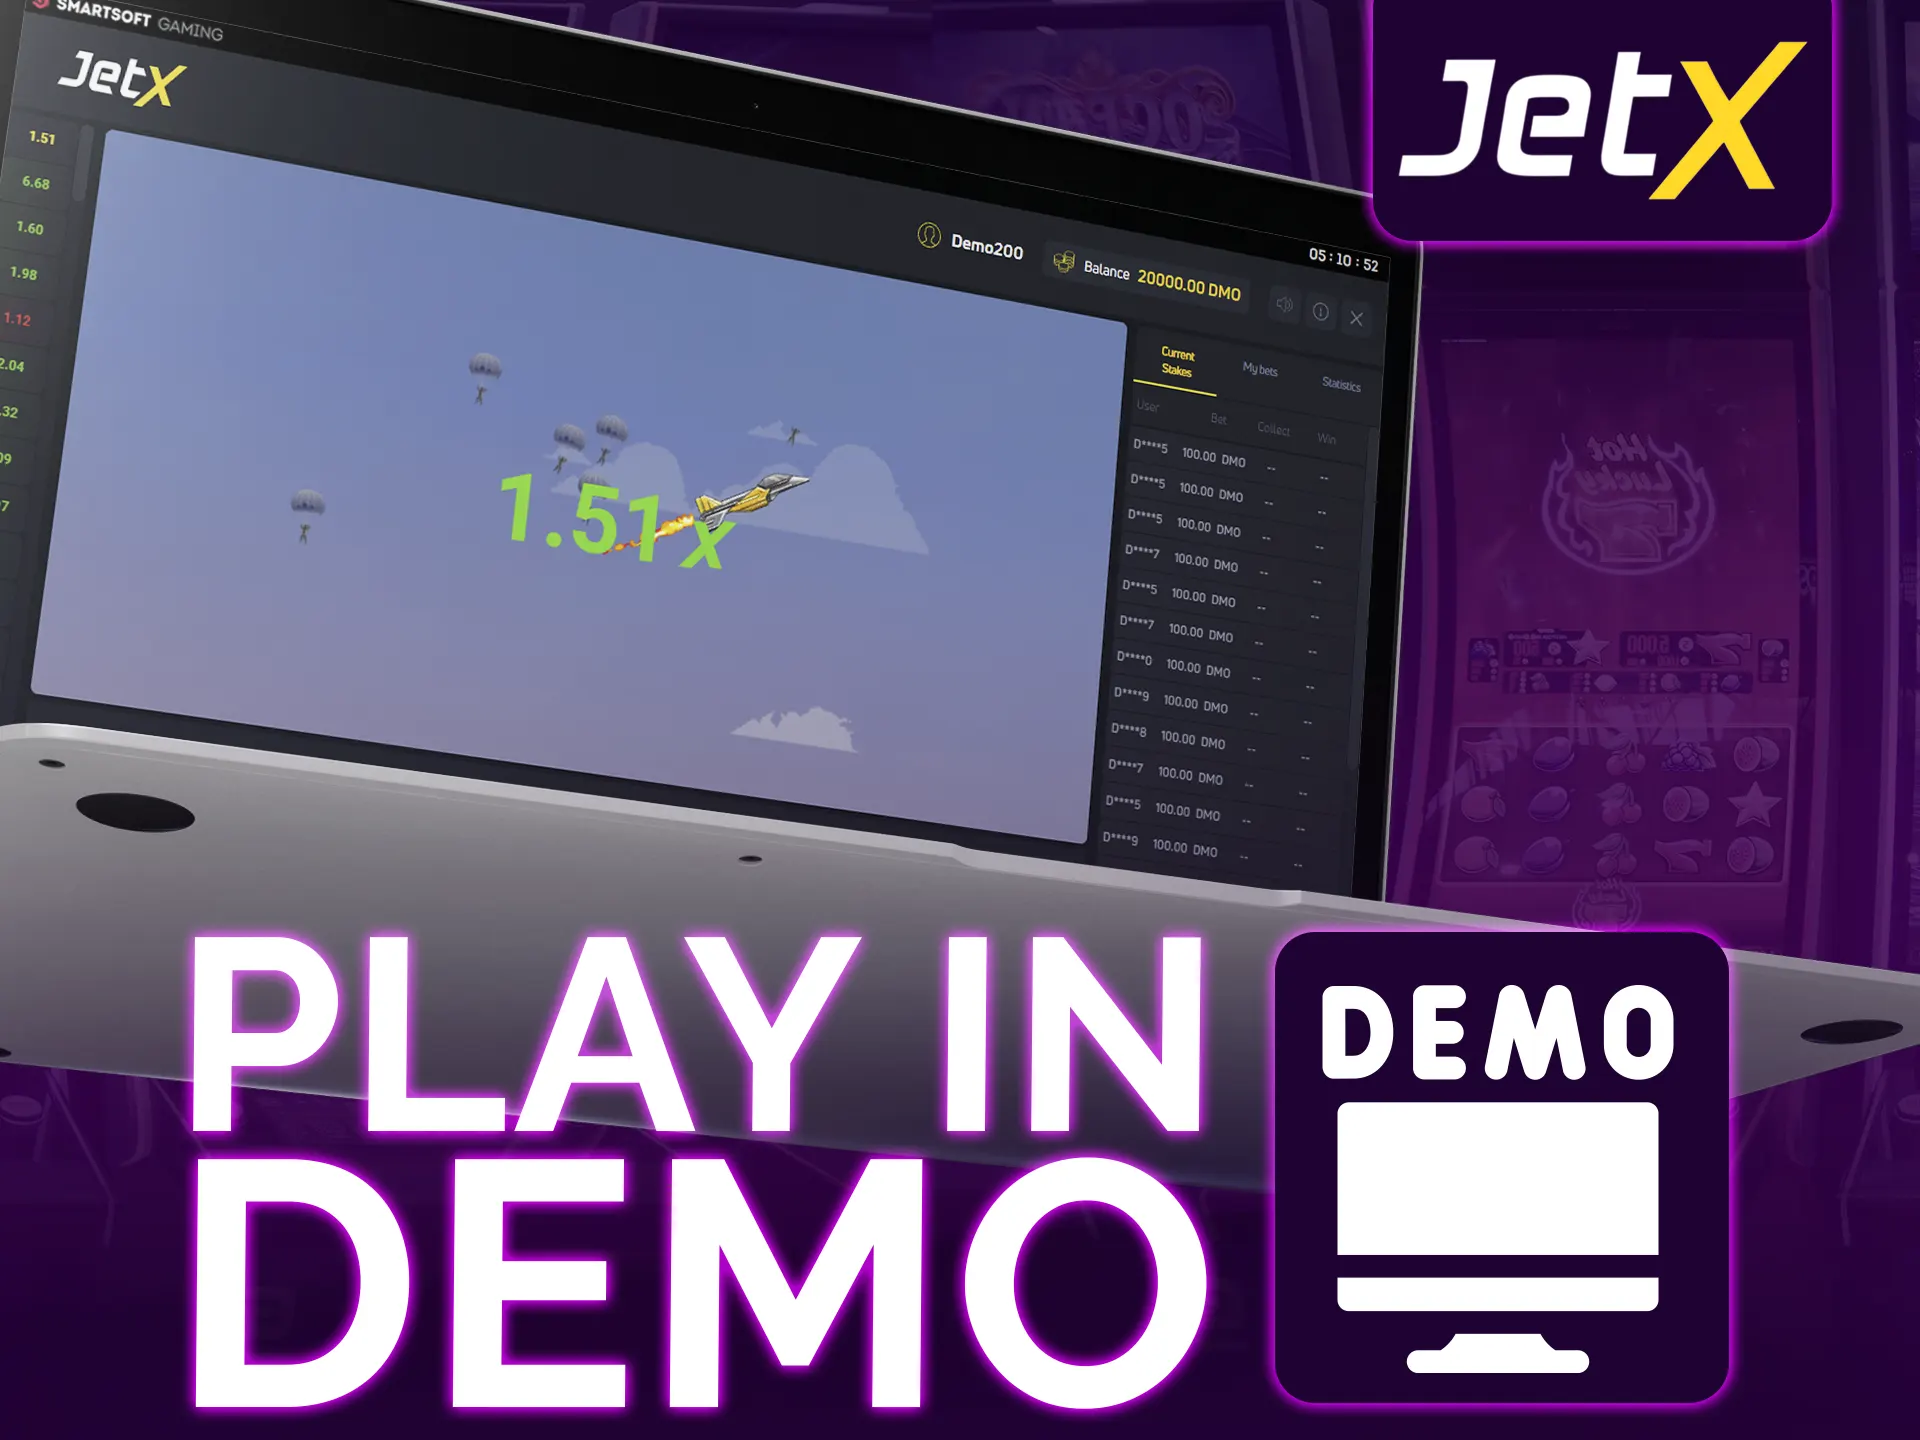 Try Jet X Demo for risk-free practice.